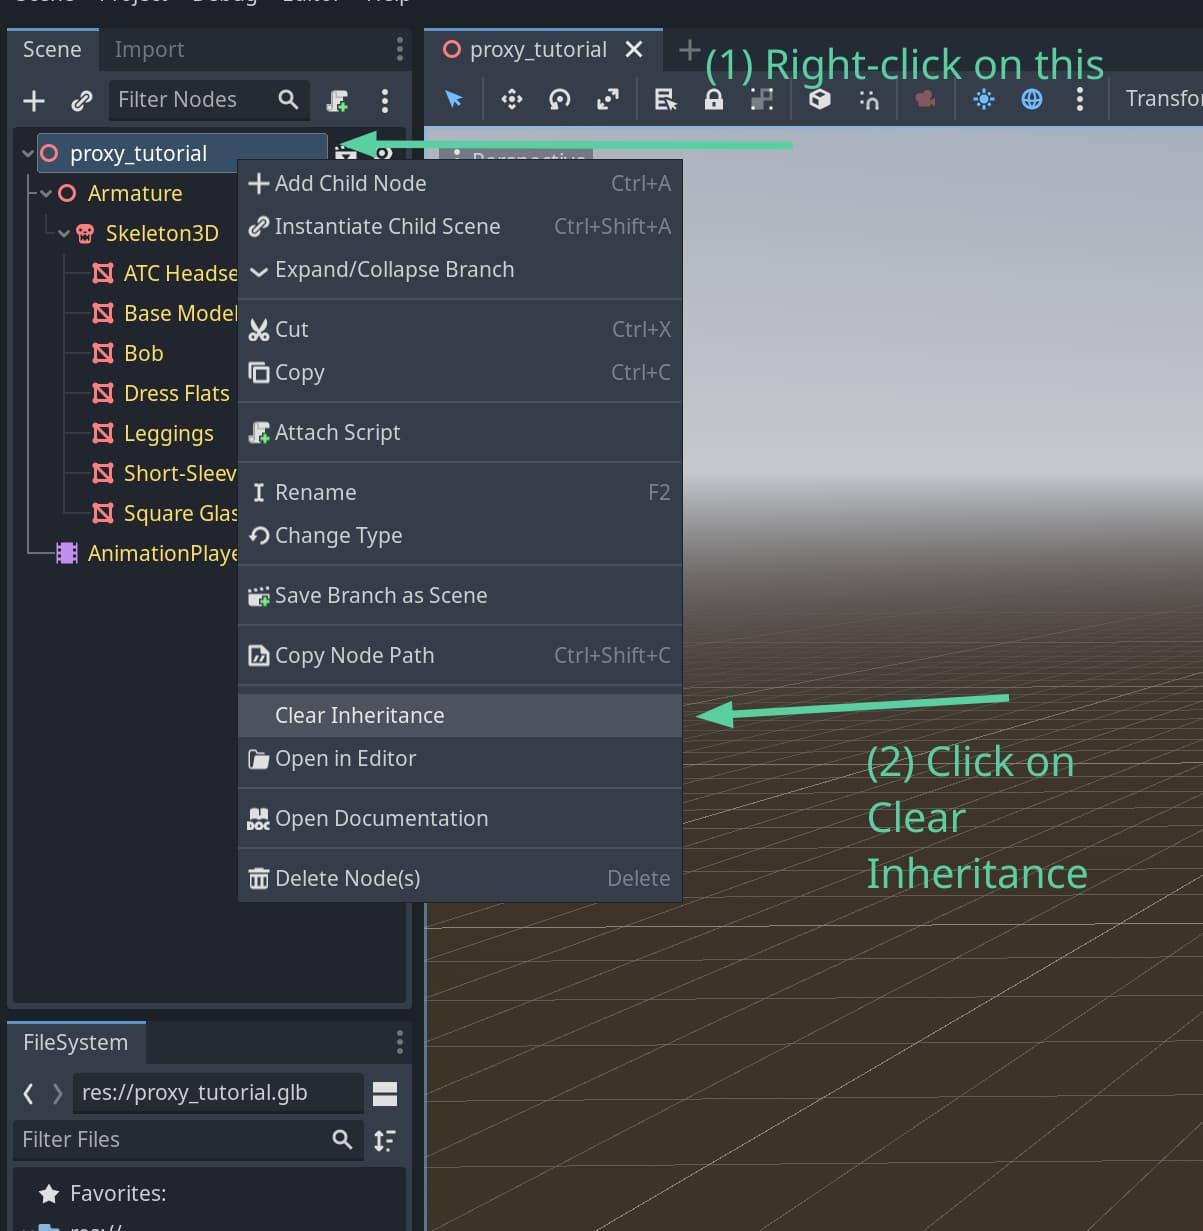 Godot screenshot showing how to right-click on the root node, and click on Clear Inheritance on the window that pops up